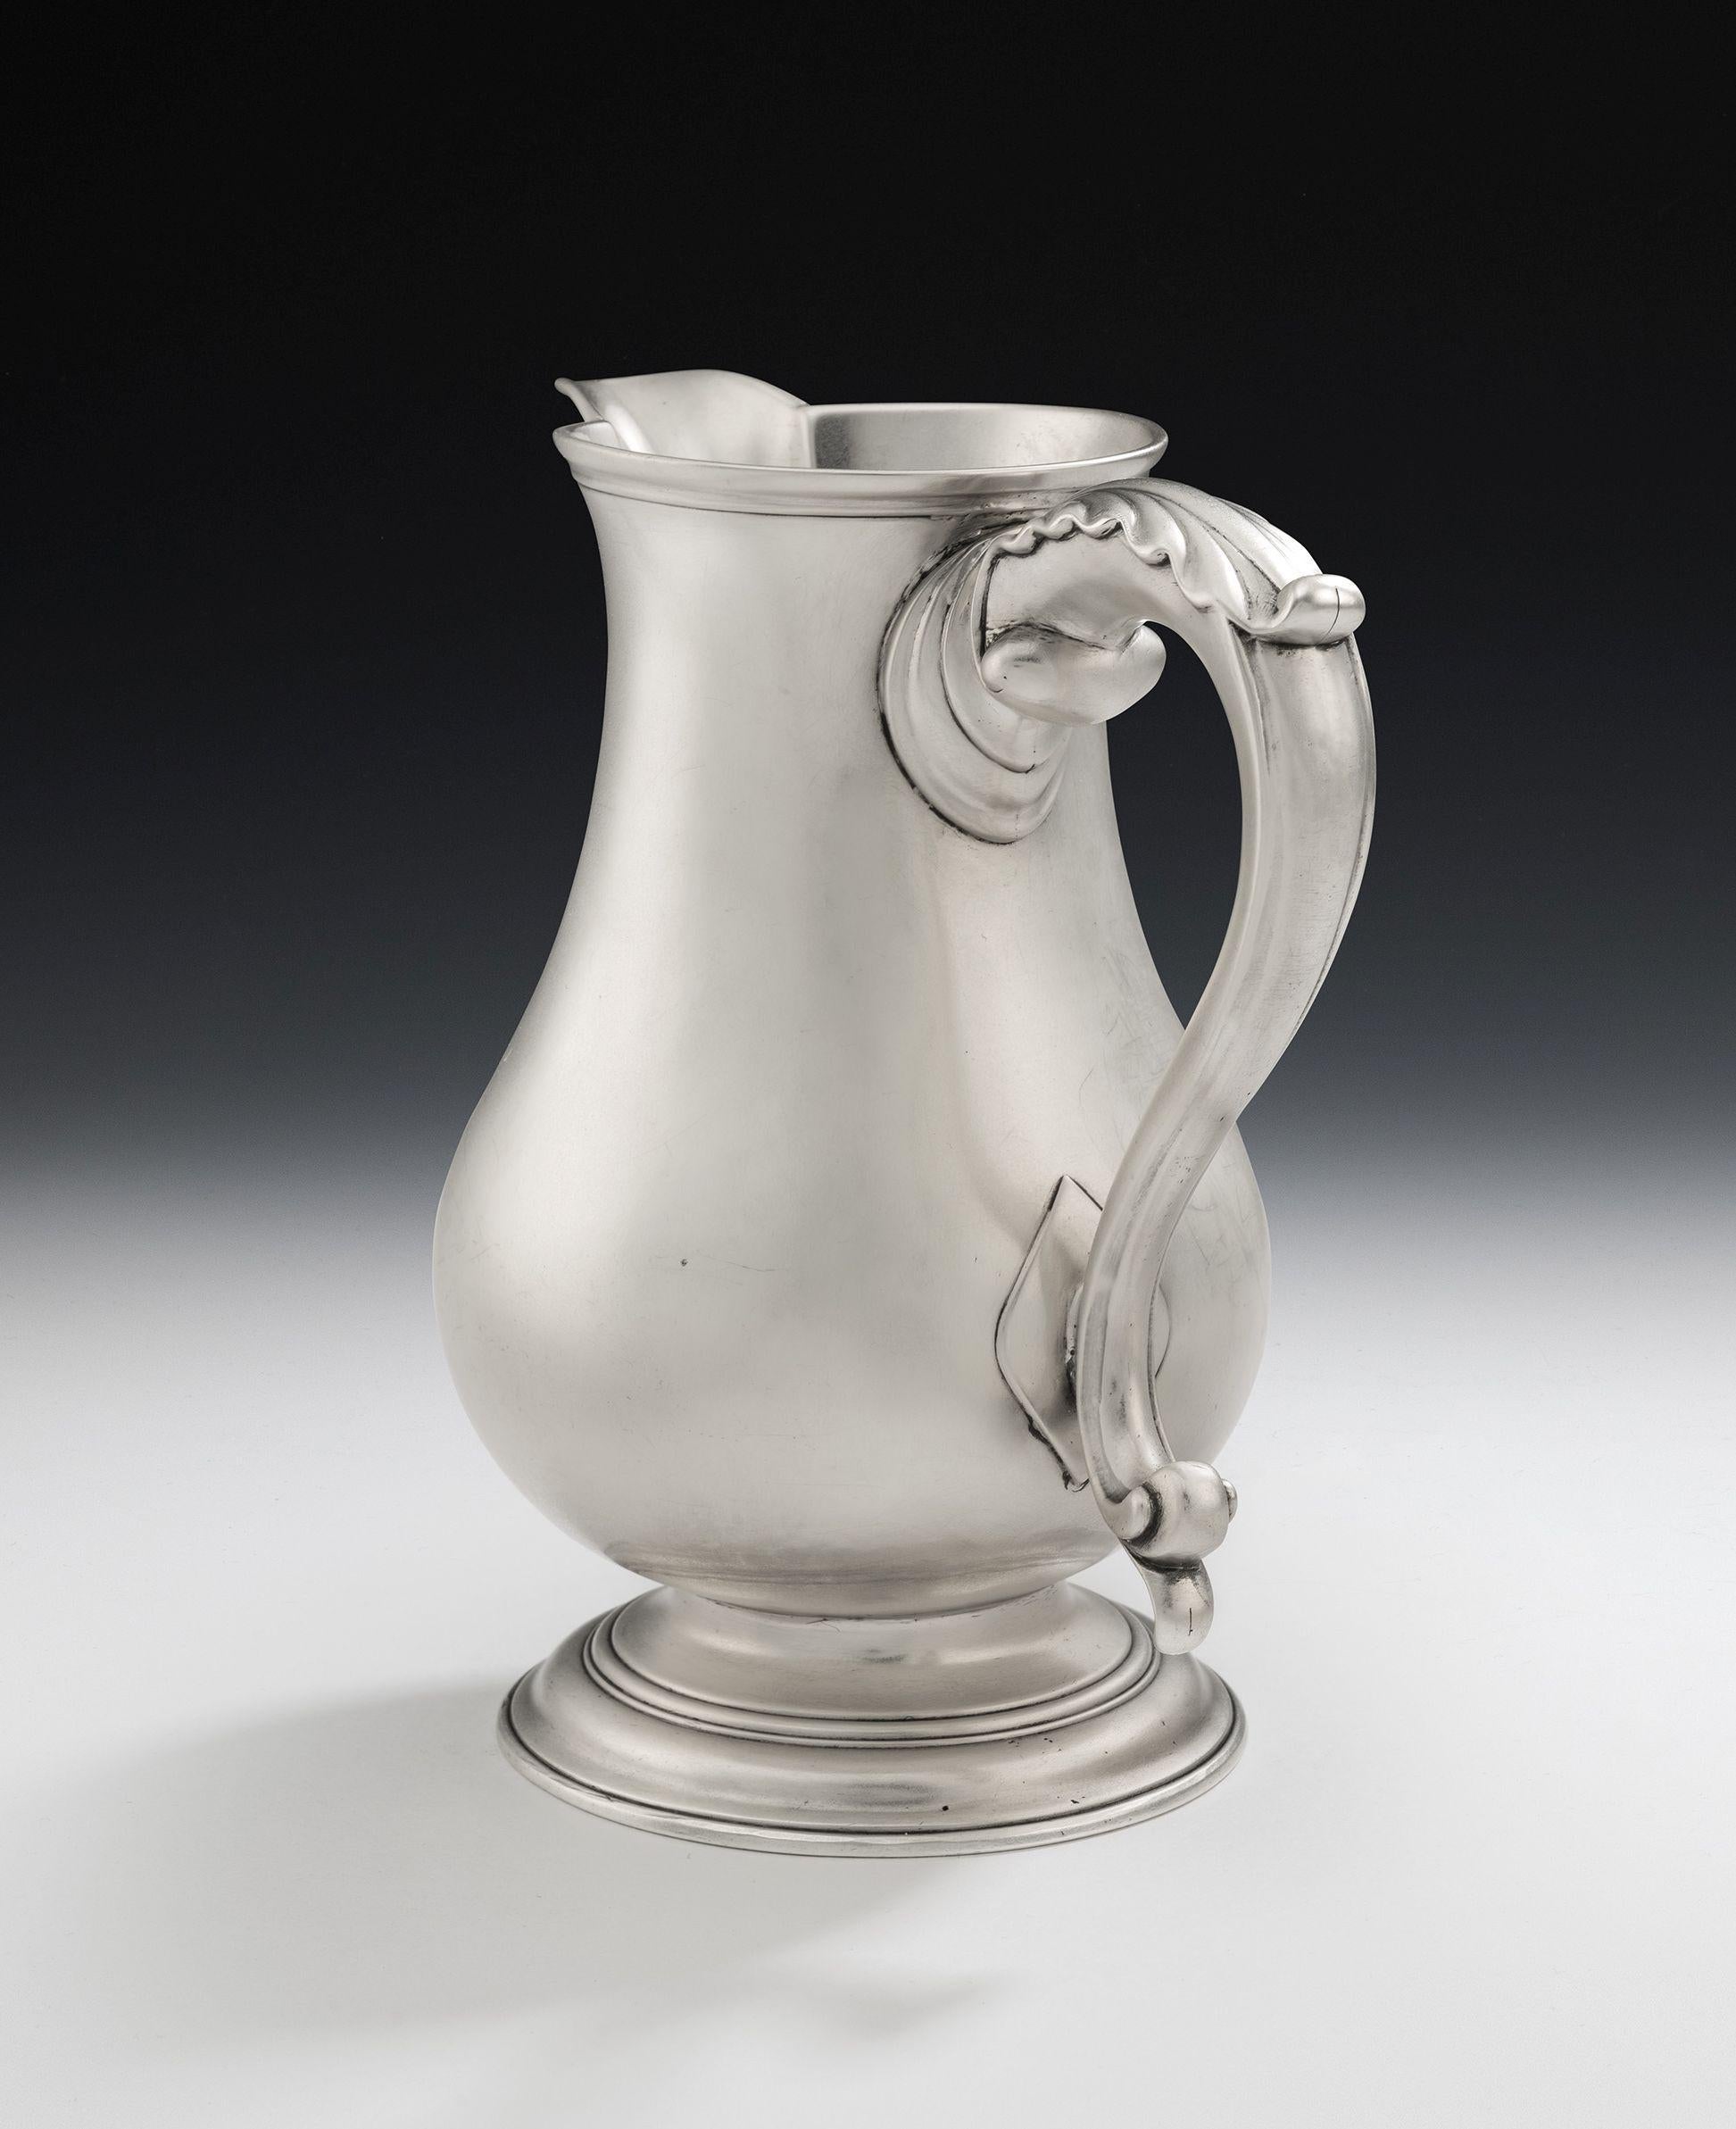 This extremely fine George II antique, sterling silver, Armorial wine/water/beer jug was made in London in 1759 by Robert Albin Cox. The Jug is of an attractive size and stands on a cast and applied spreading foot which is decorated with various